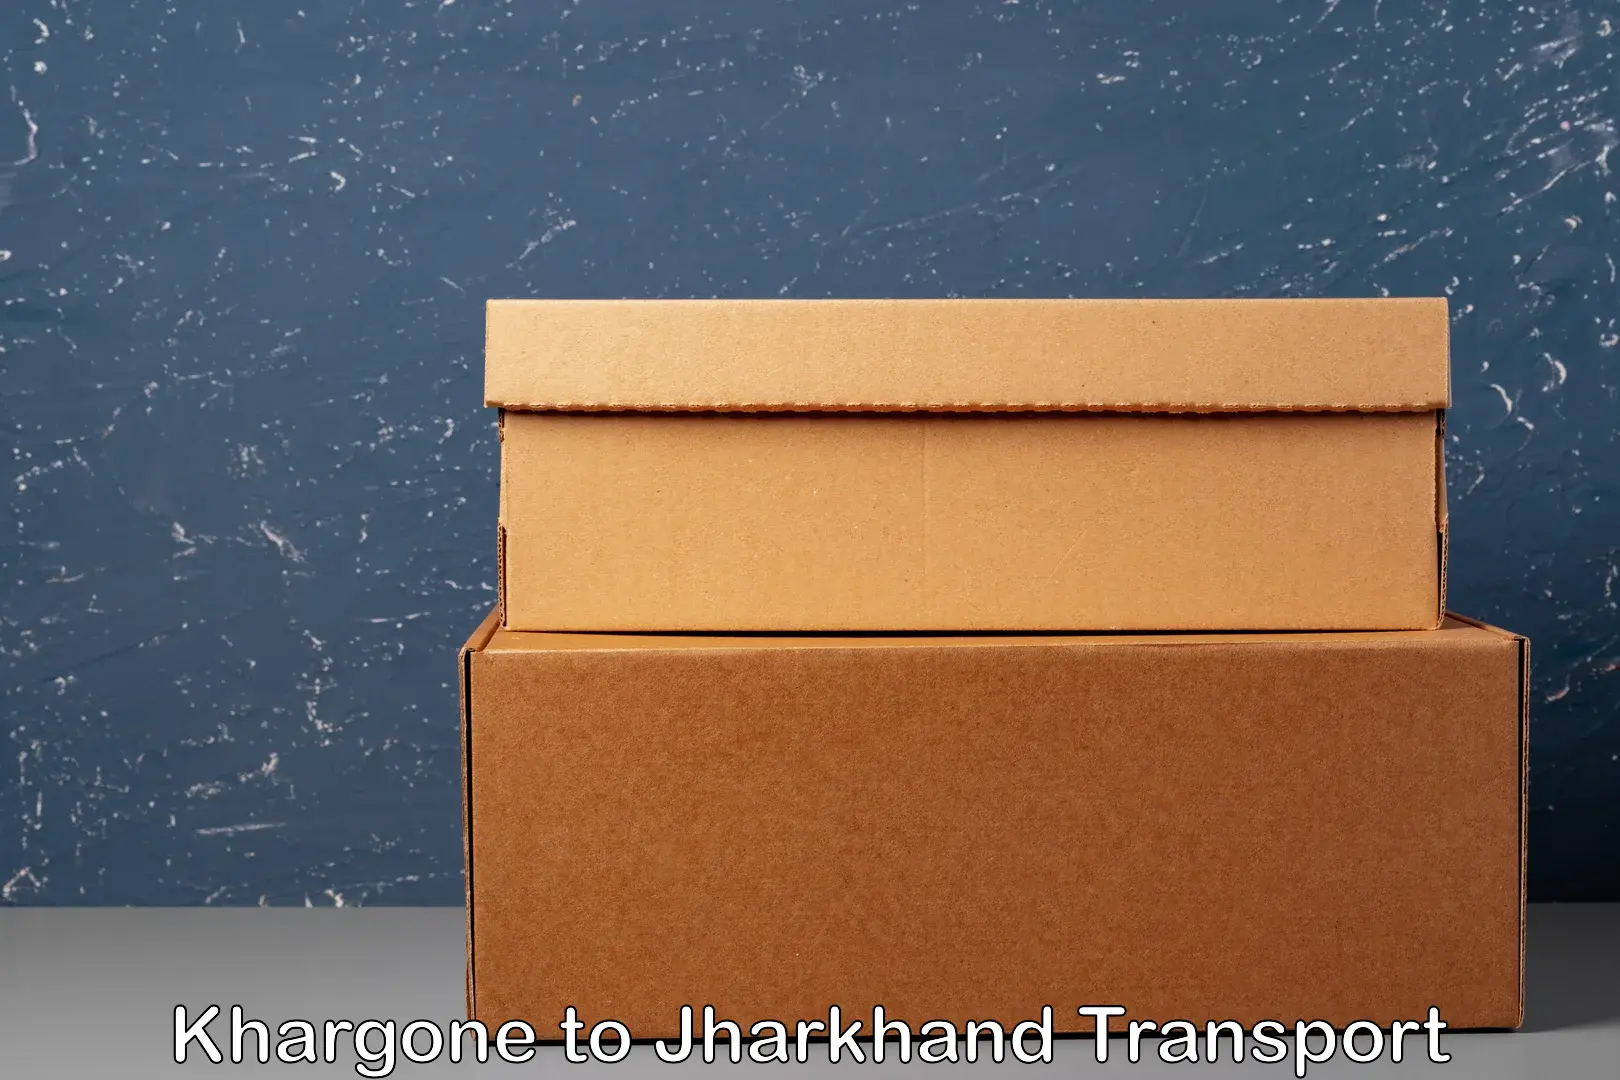 Air cargo transport services Khargone to Jharkhand